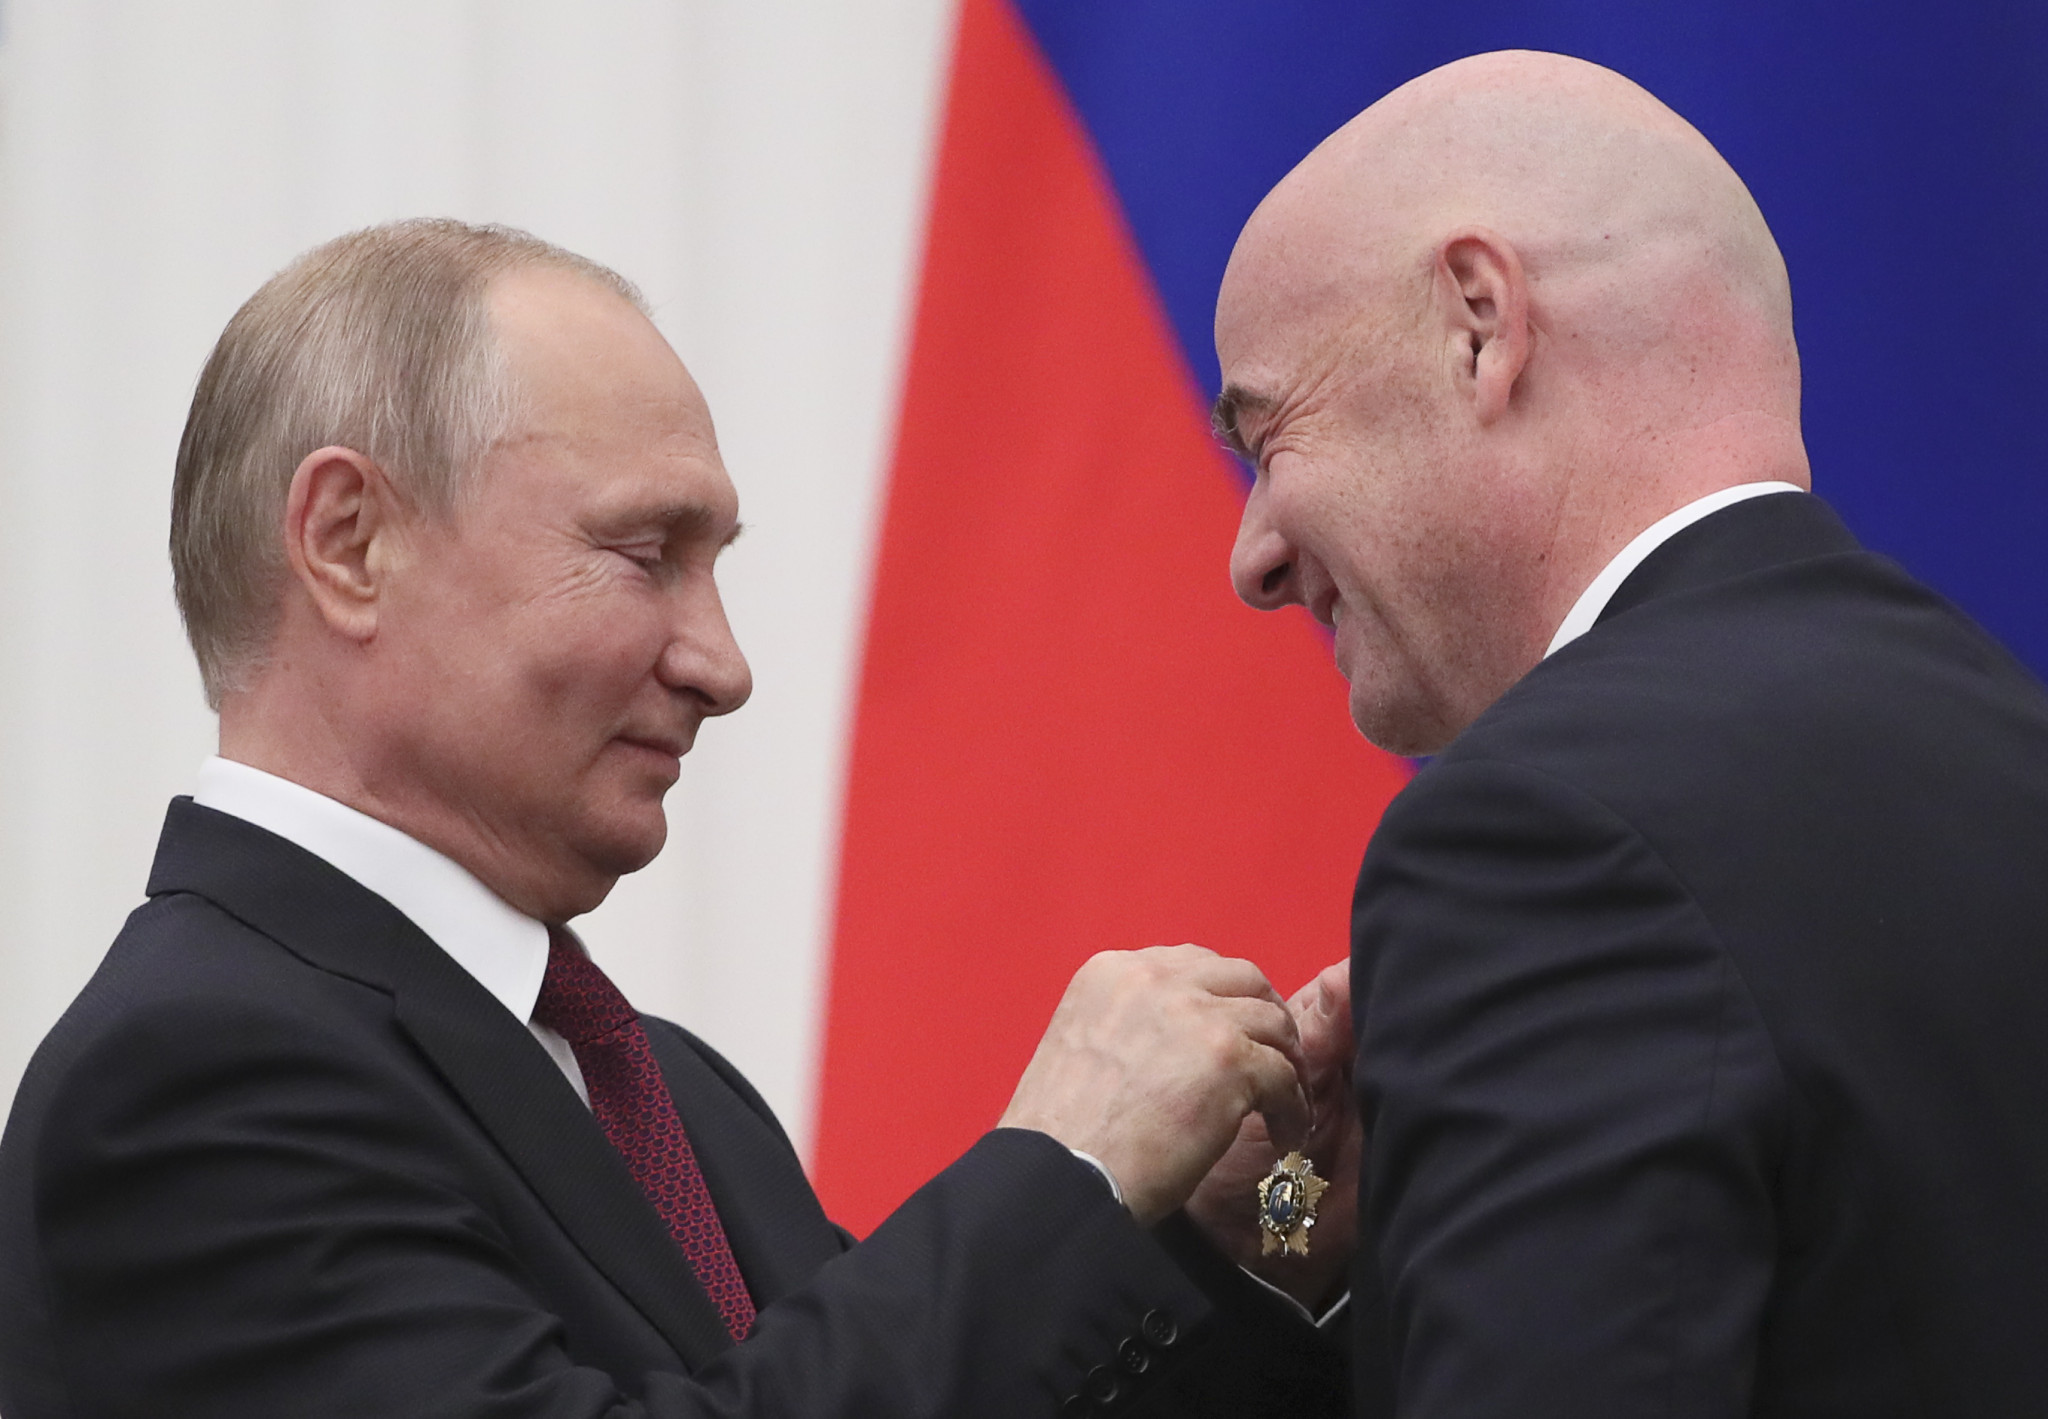 Gianni Infantino, right, has been previously criticised for his close ties with Russia and Saudi Arabia ©Getty Images